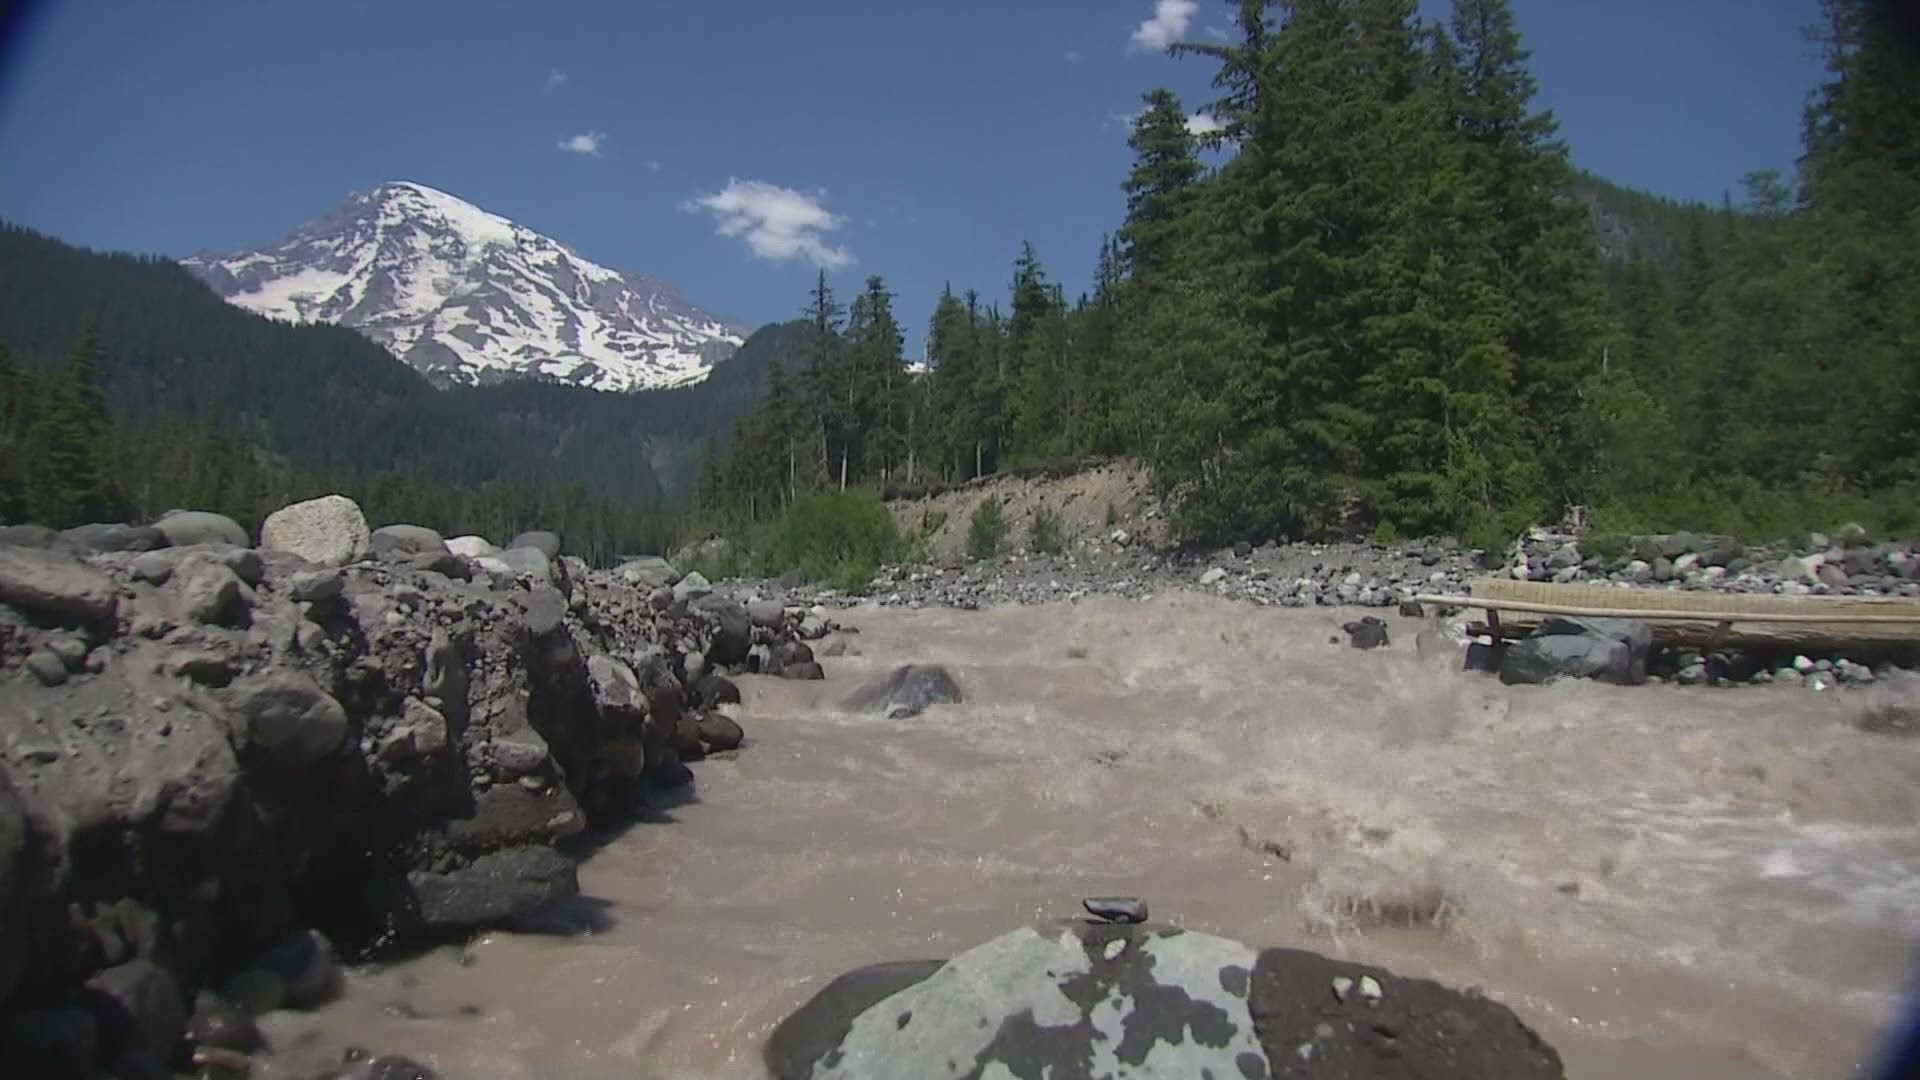 As COVID-19 restrictions lift across the country, Mount Rainier National Park staff said they are on track to potentially see their busiest year in decades.